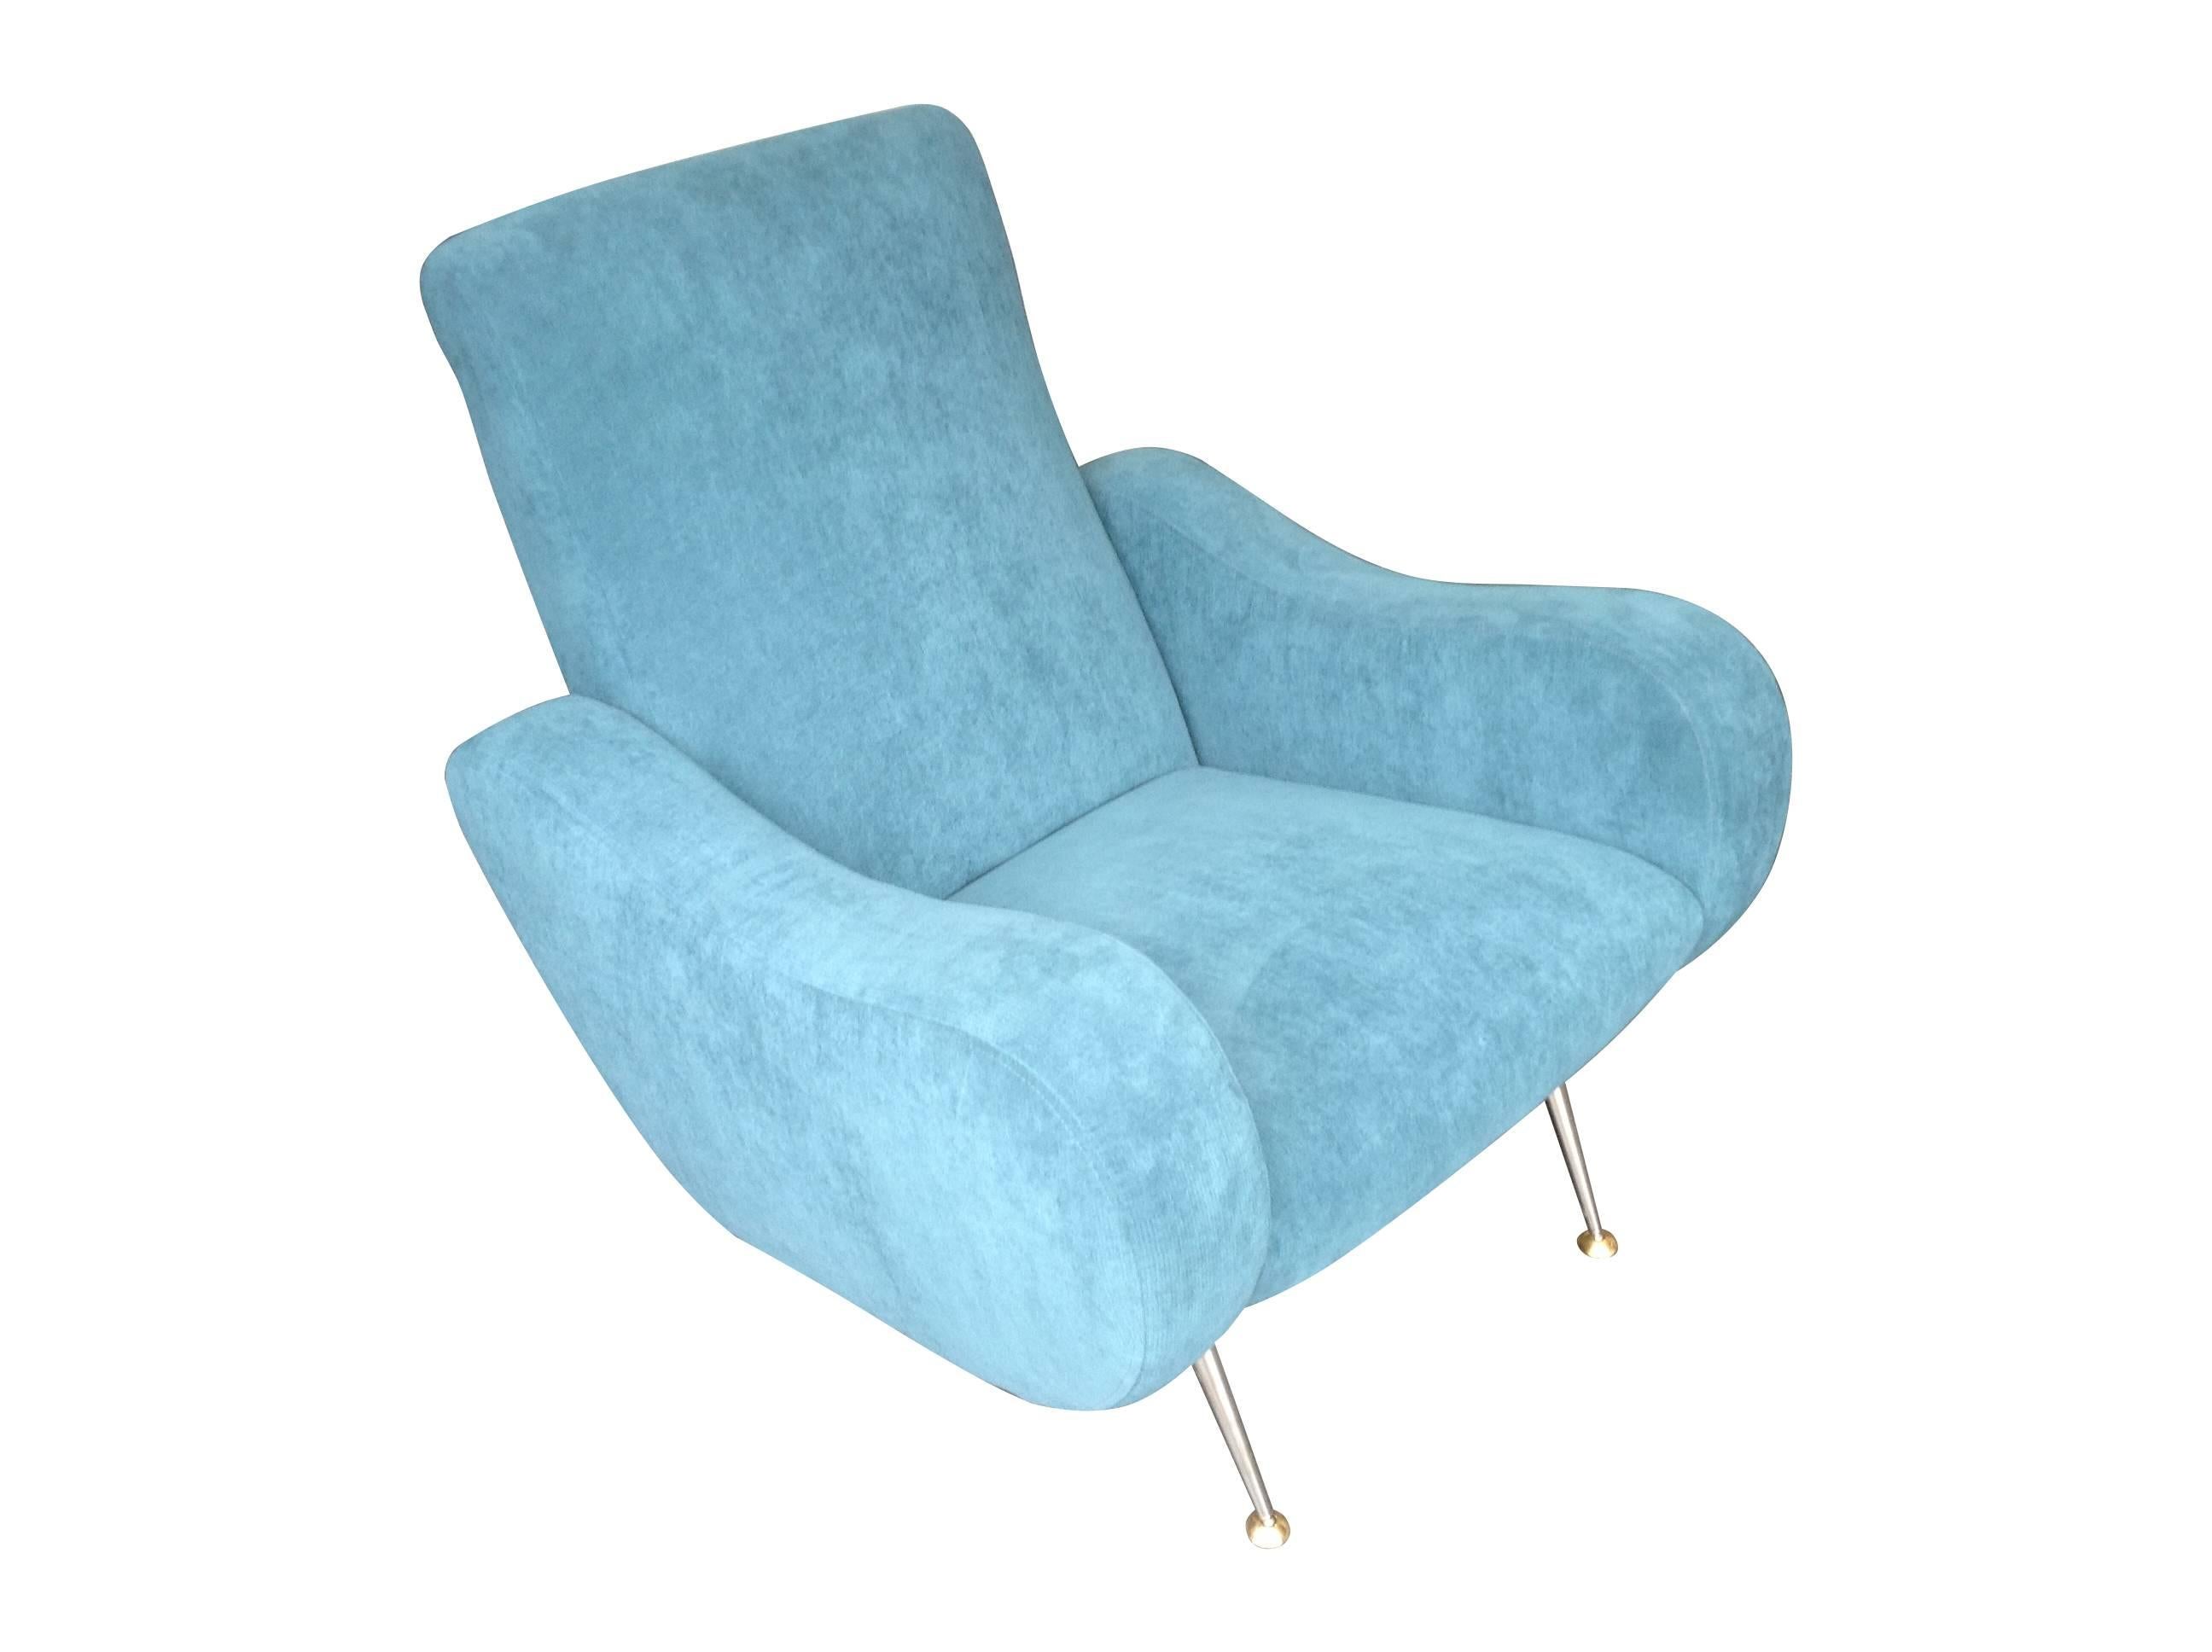 An unusual and very comfortable Gio Ponti style Italian armchair with brass legs, newly re-upholstered in blue fabric.